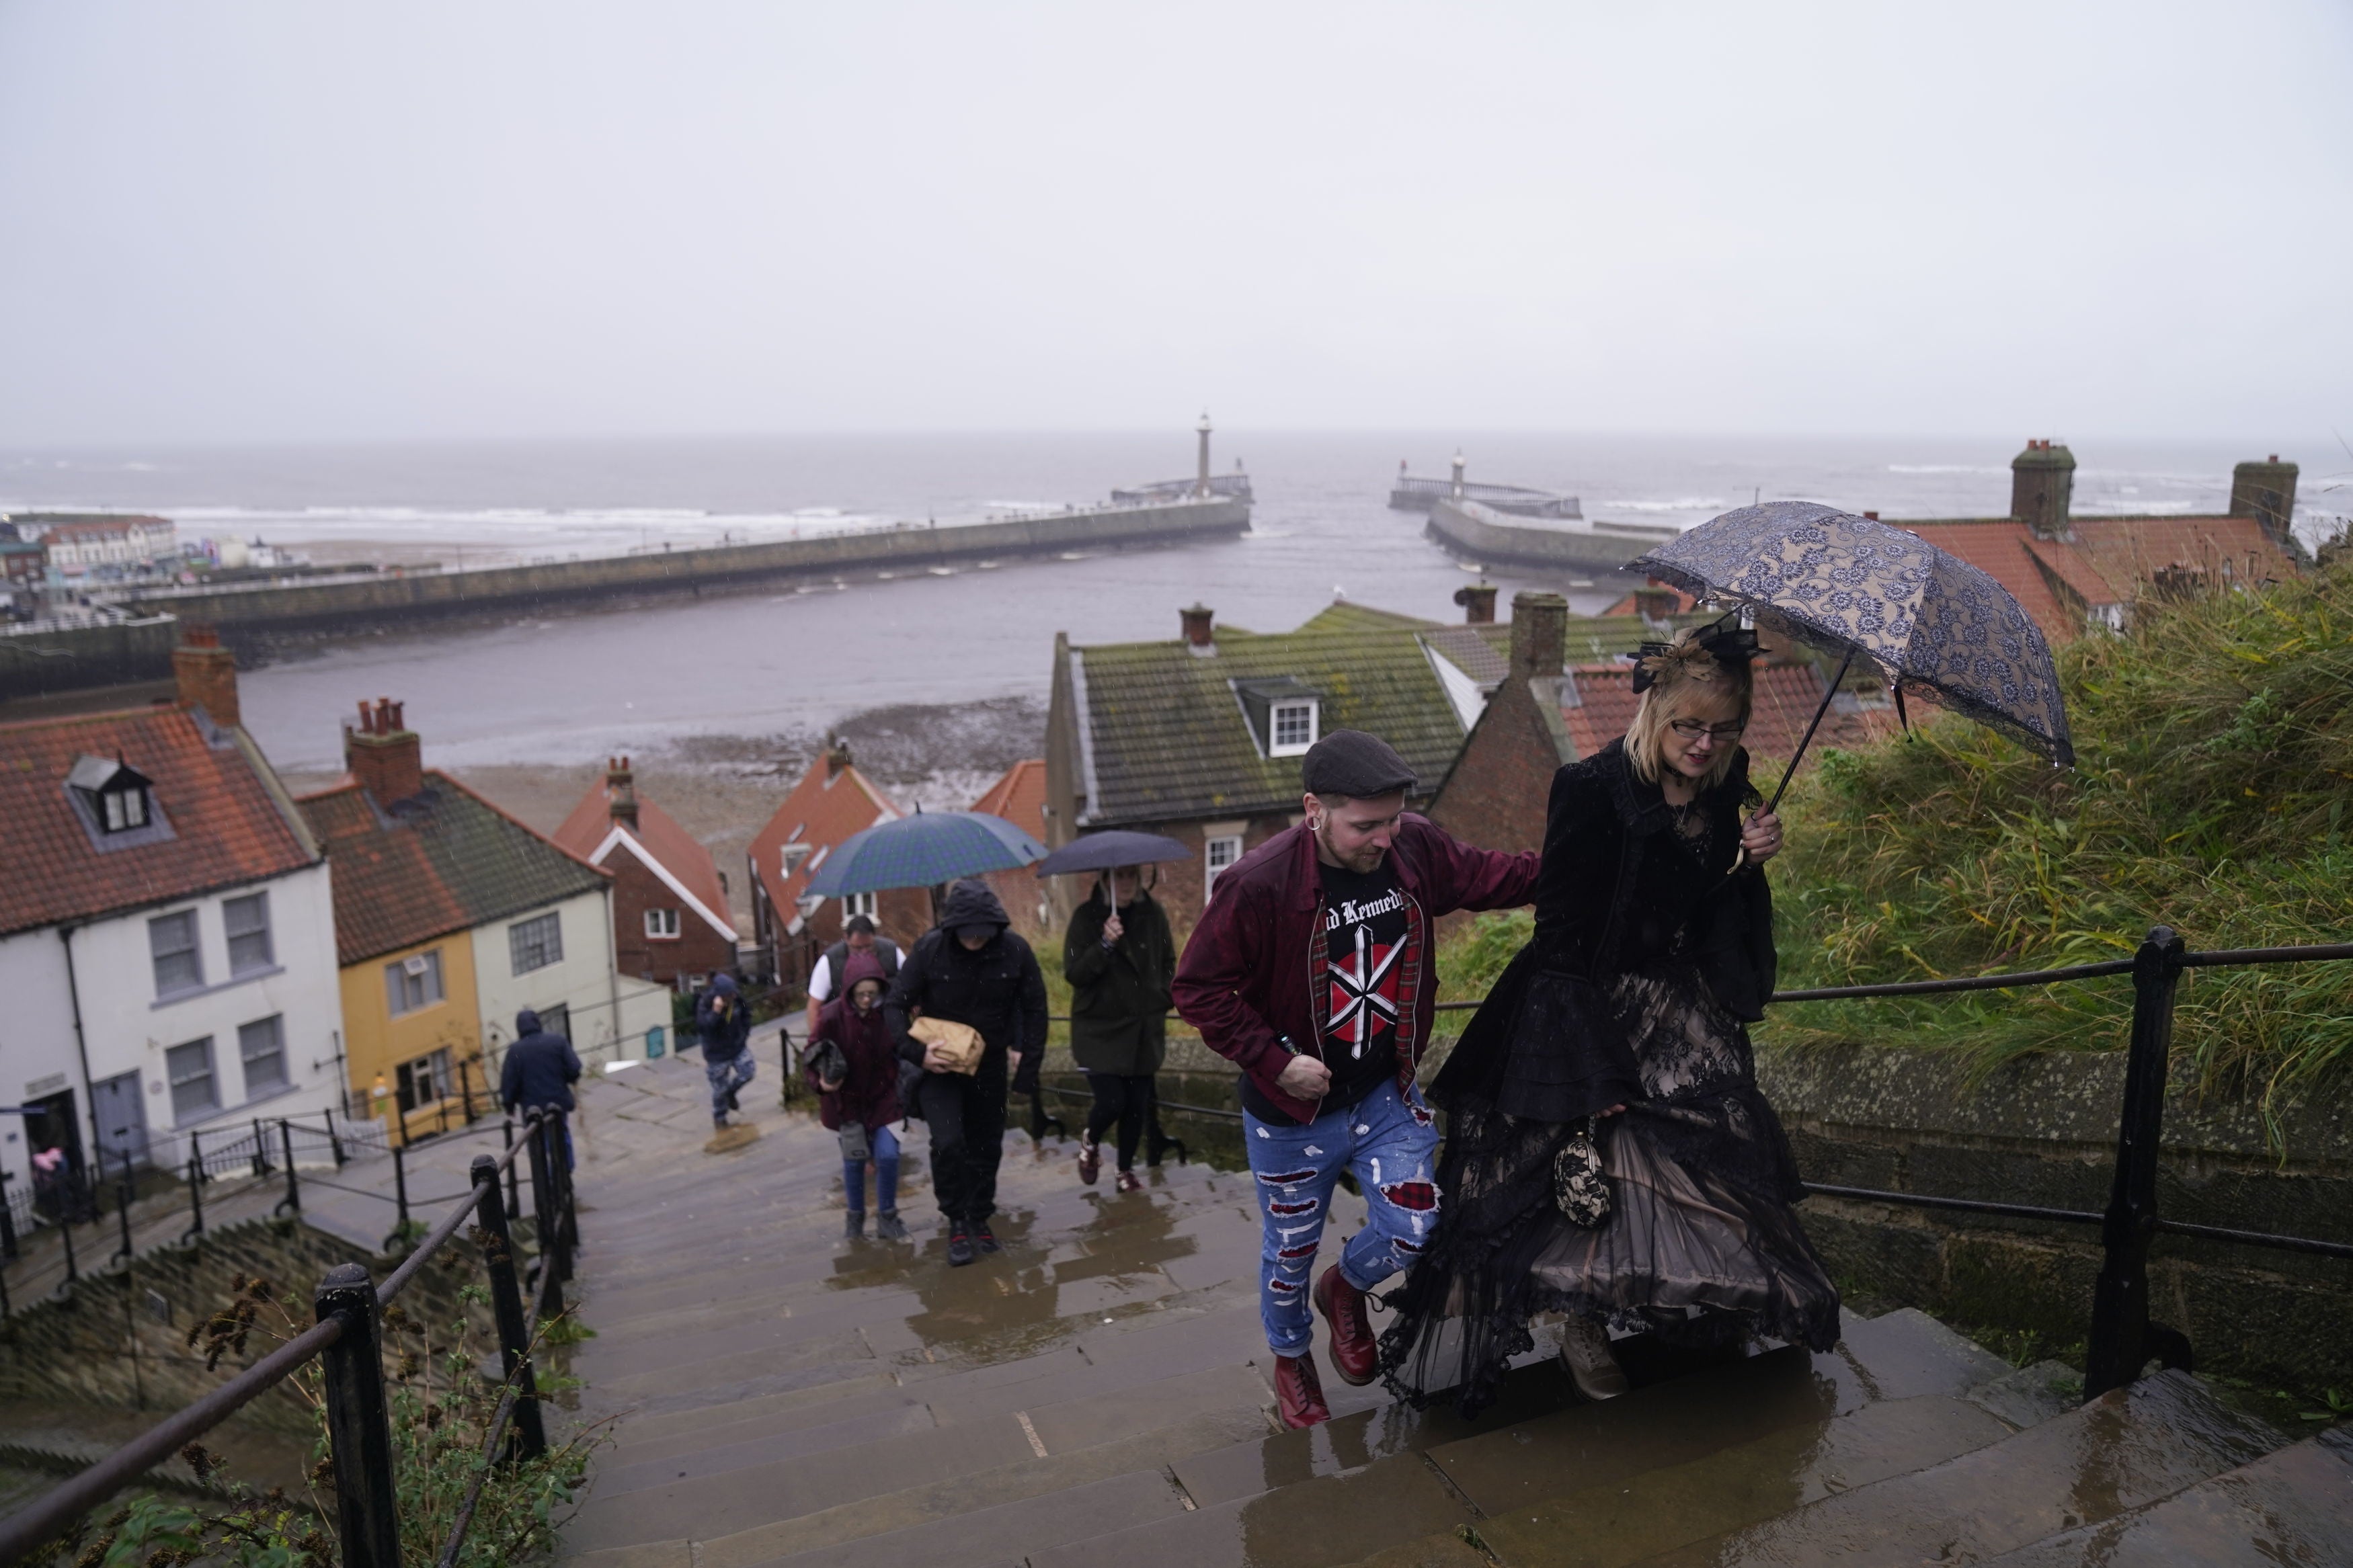 <p>People braving the rain as they attend the Whitby Goth Weekend in Whitby, Yorkshire.</p>